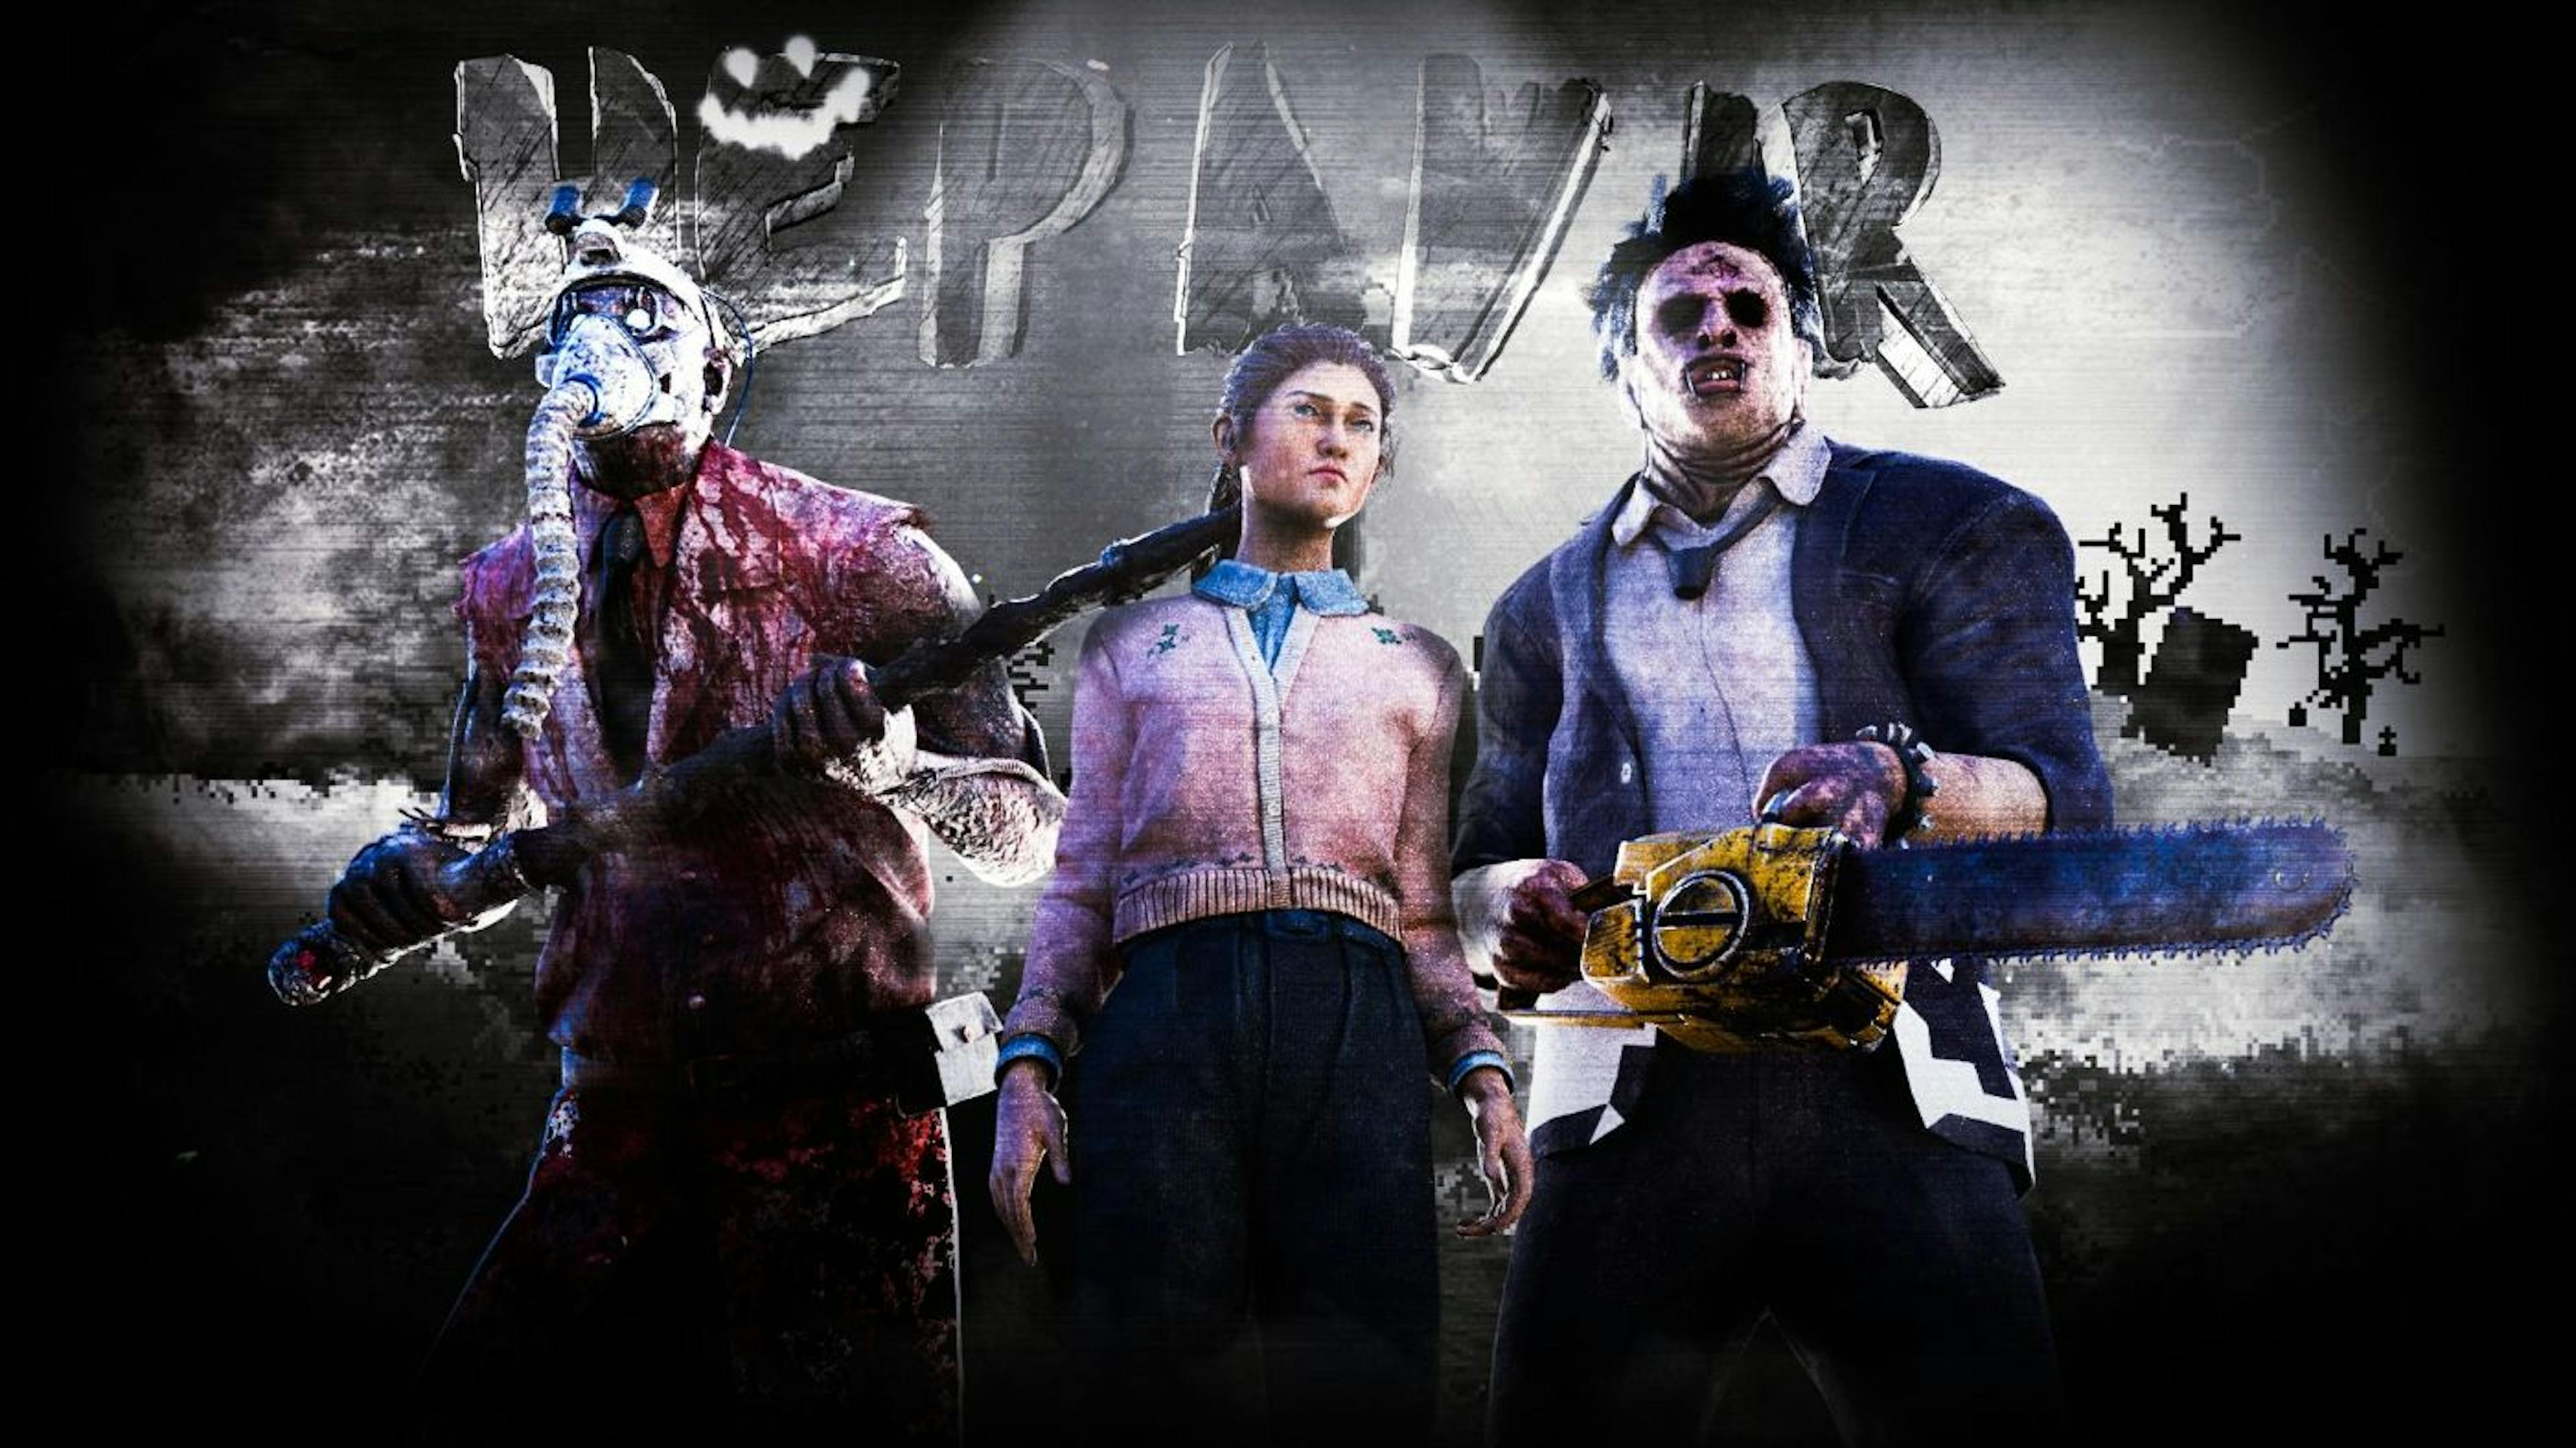 The Doctor, Meg Thomas, and Leatherface on Dead by Daylight. Image source: Loan MERLIN on Behance.